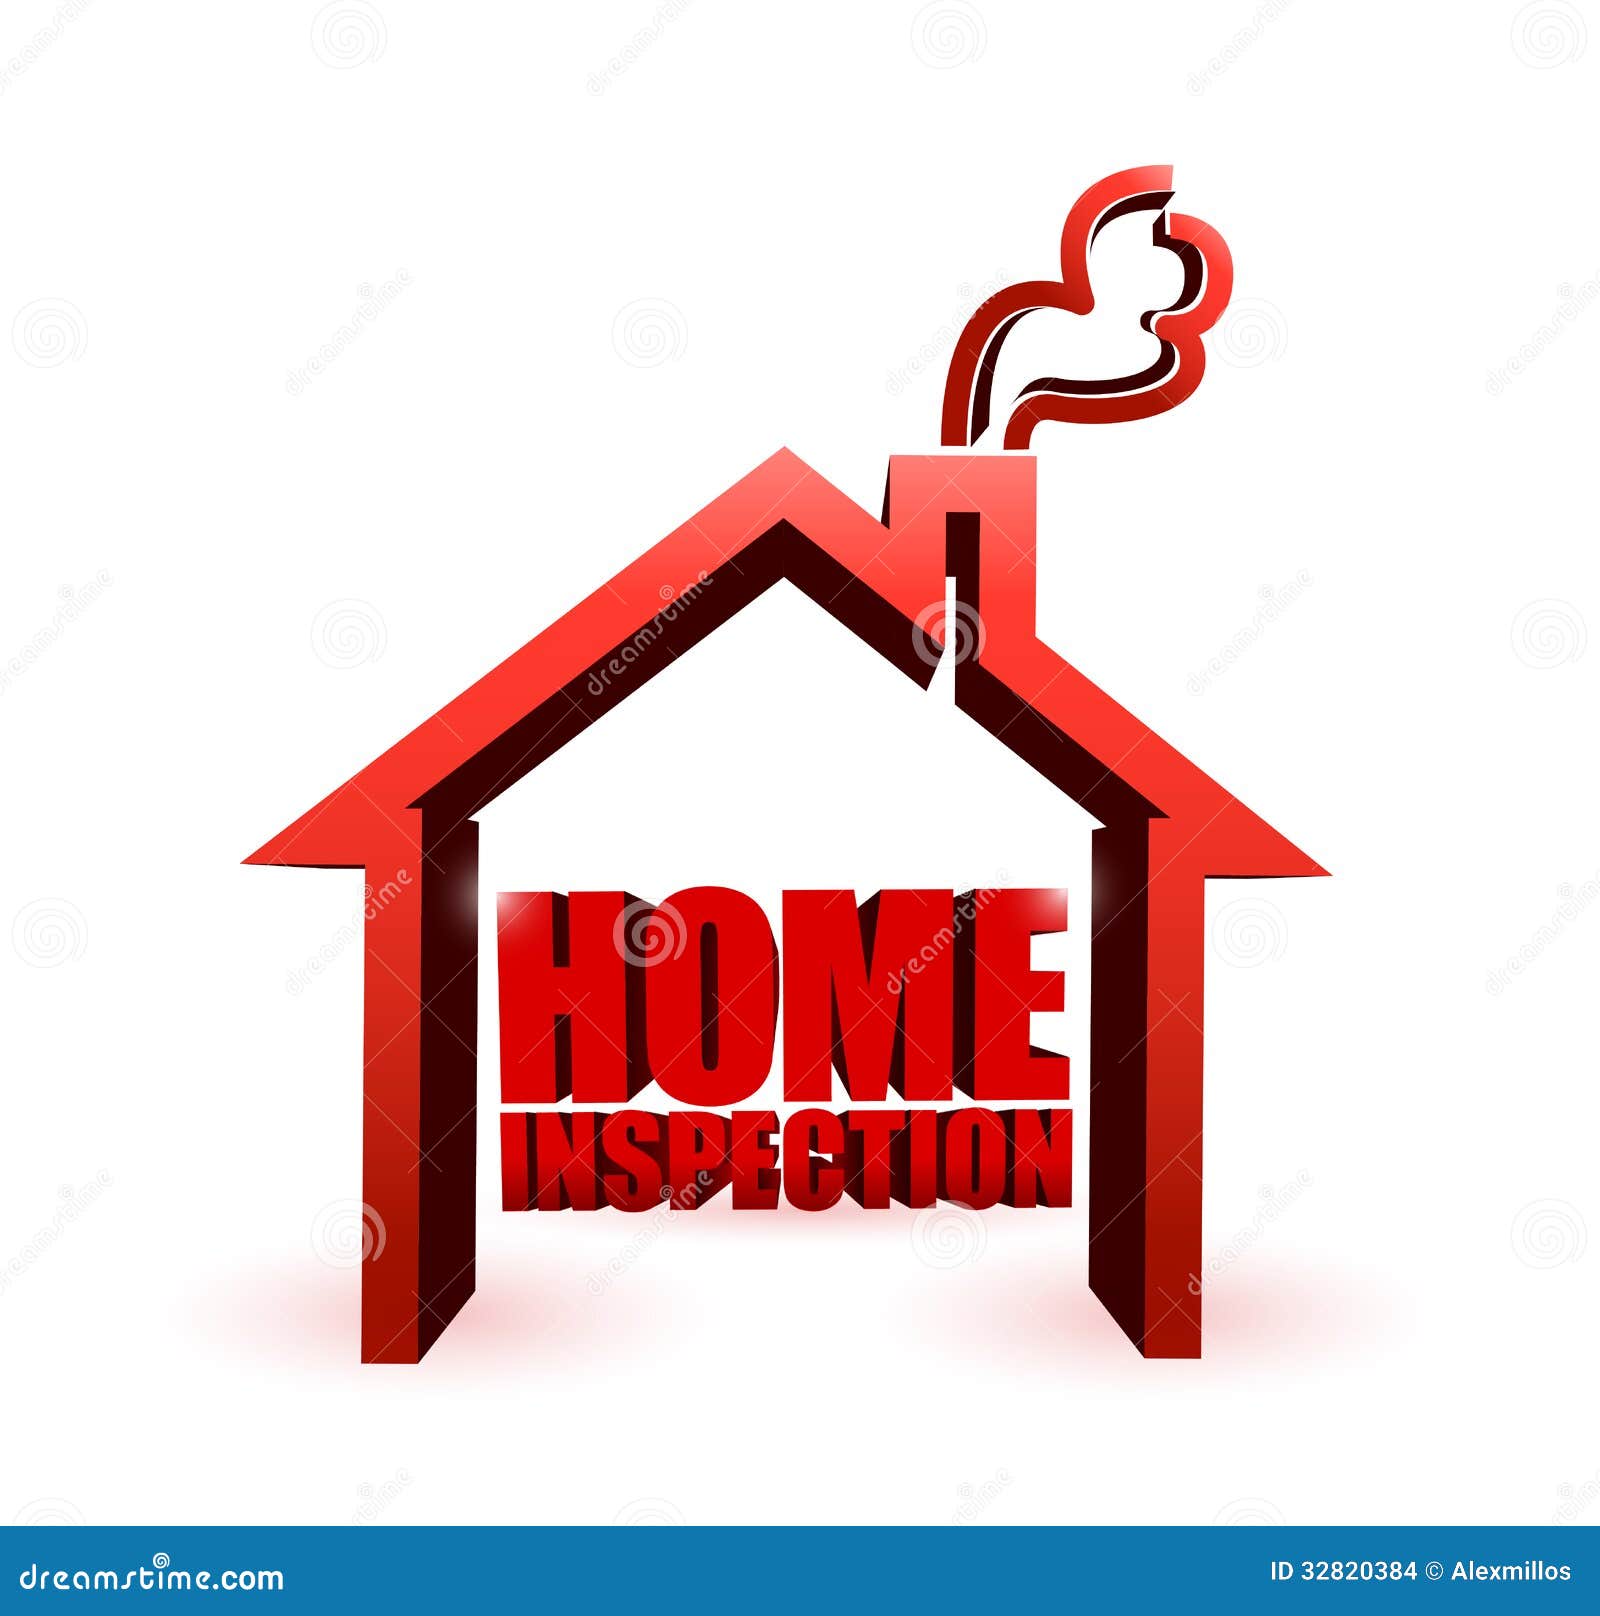 home inspection clipart - photo #18